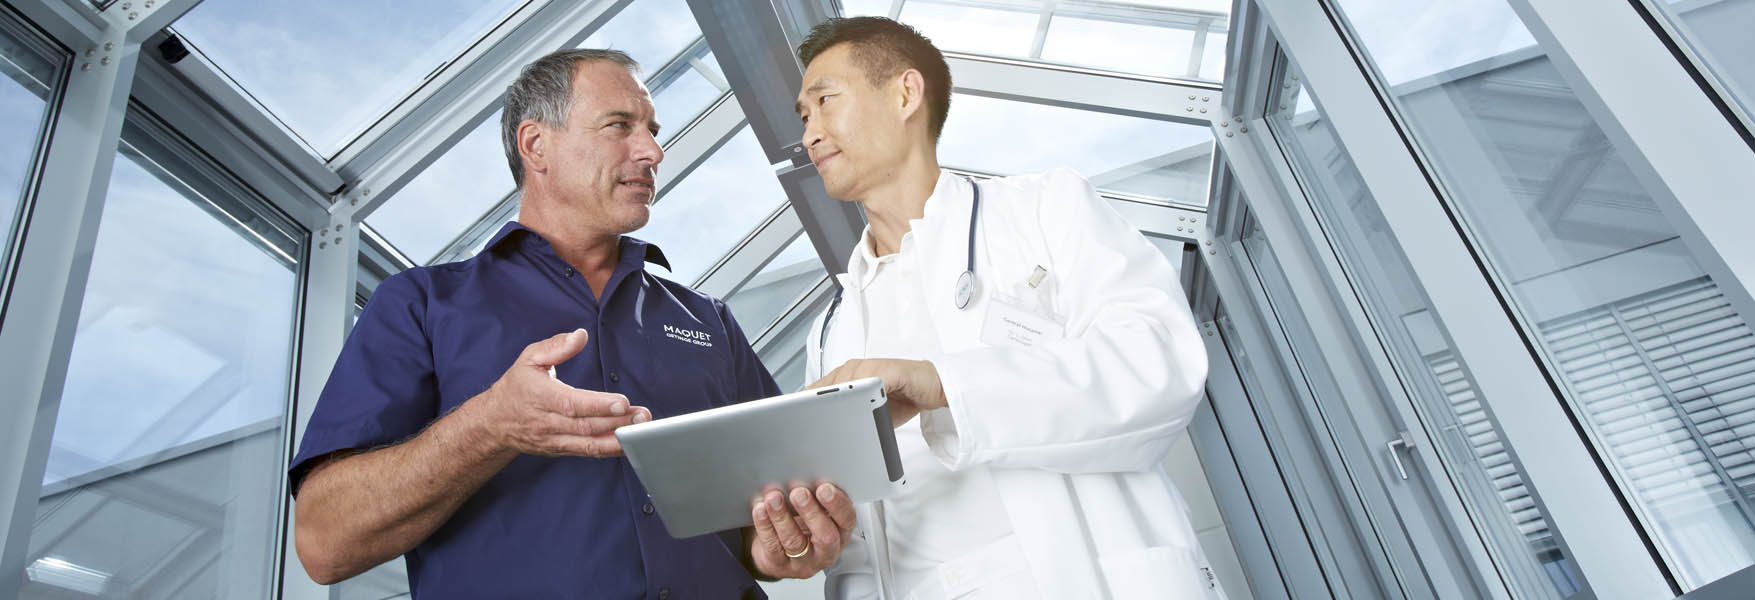 Doctor with a man holding ipad